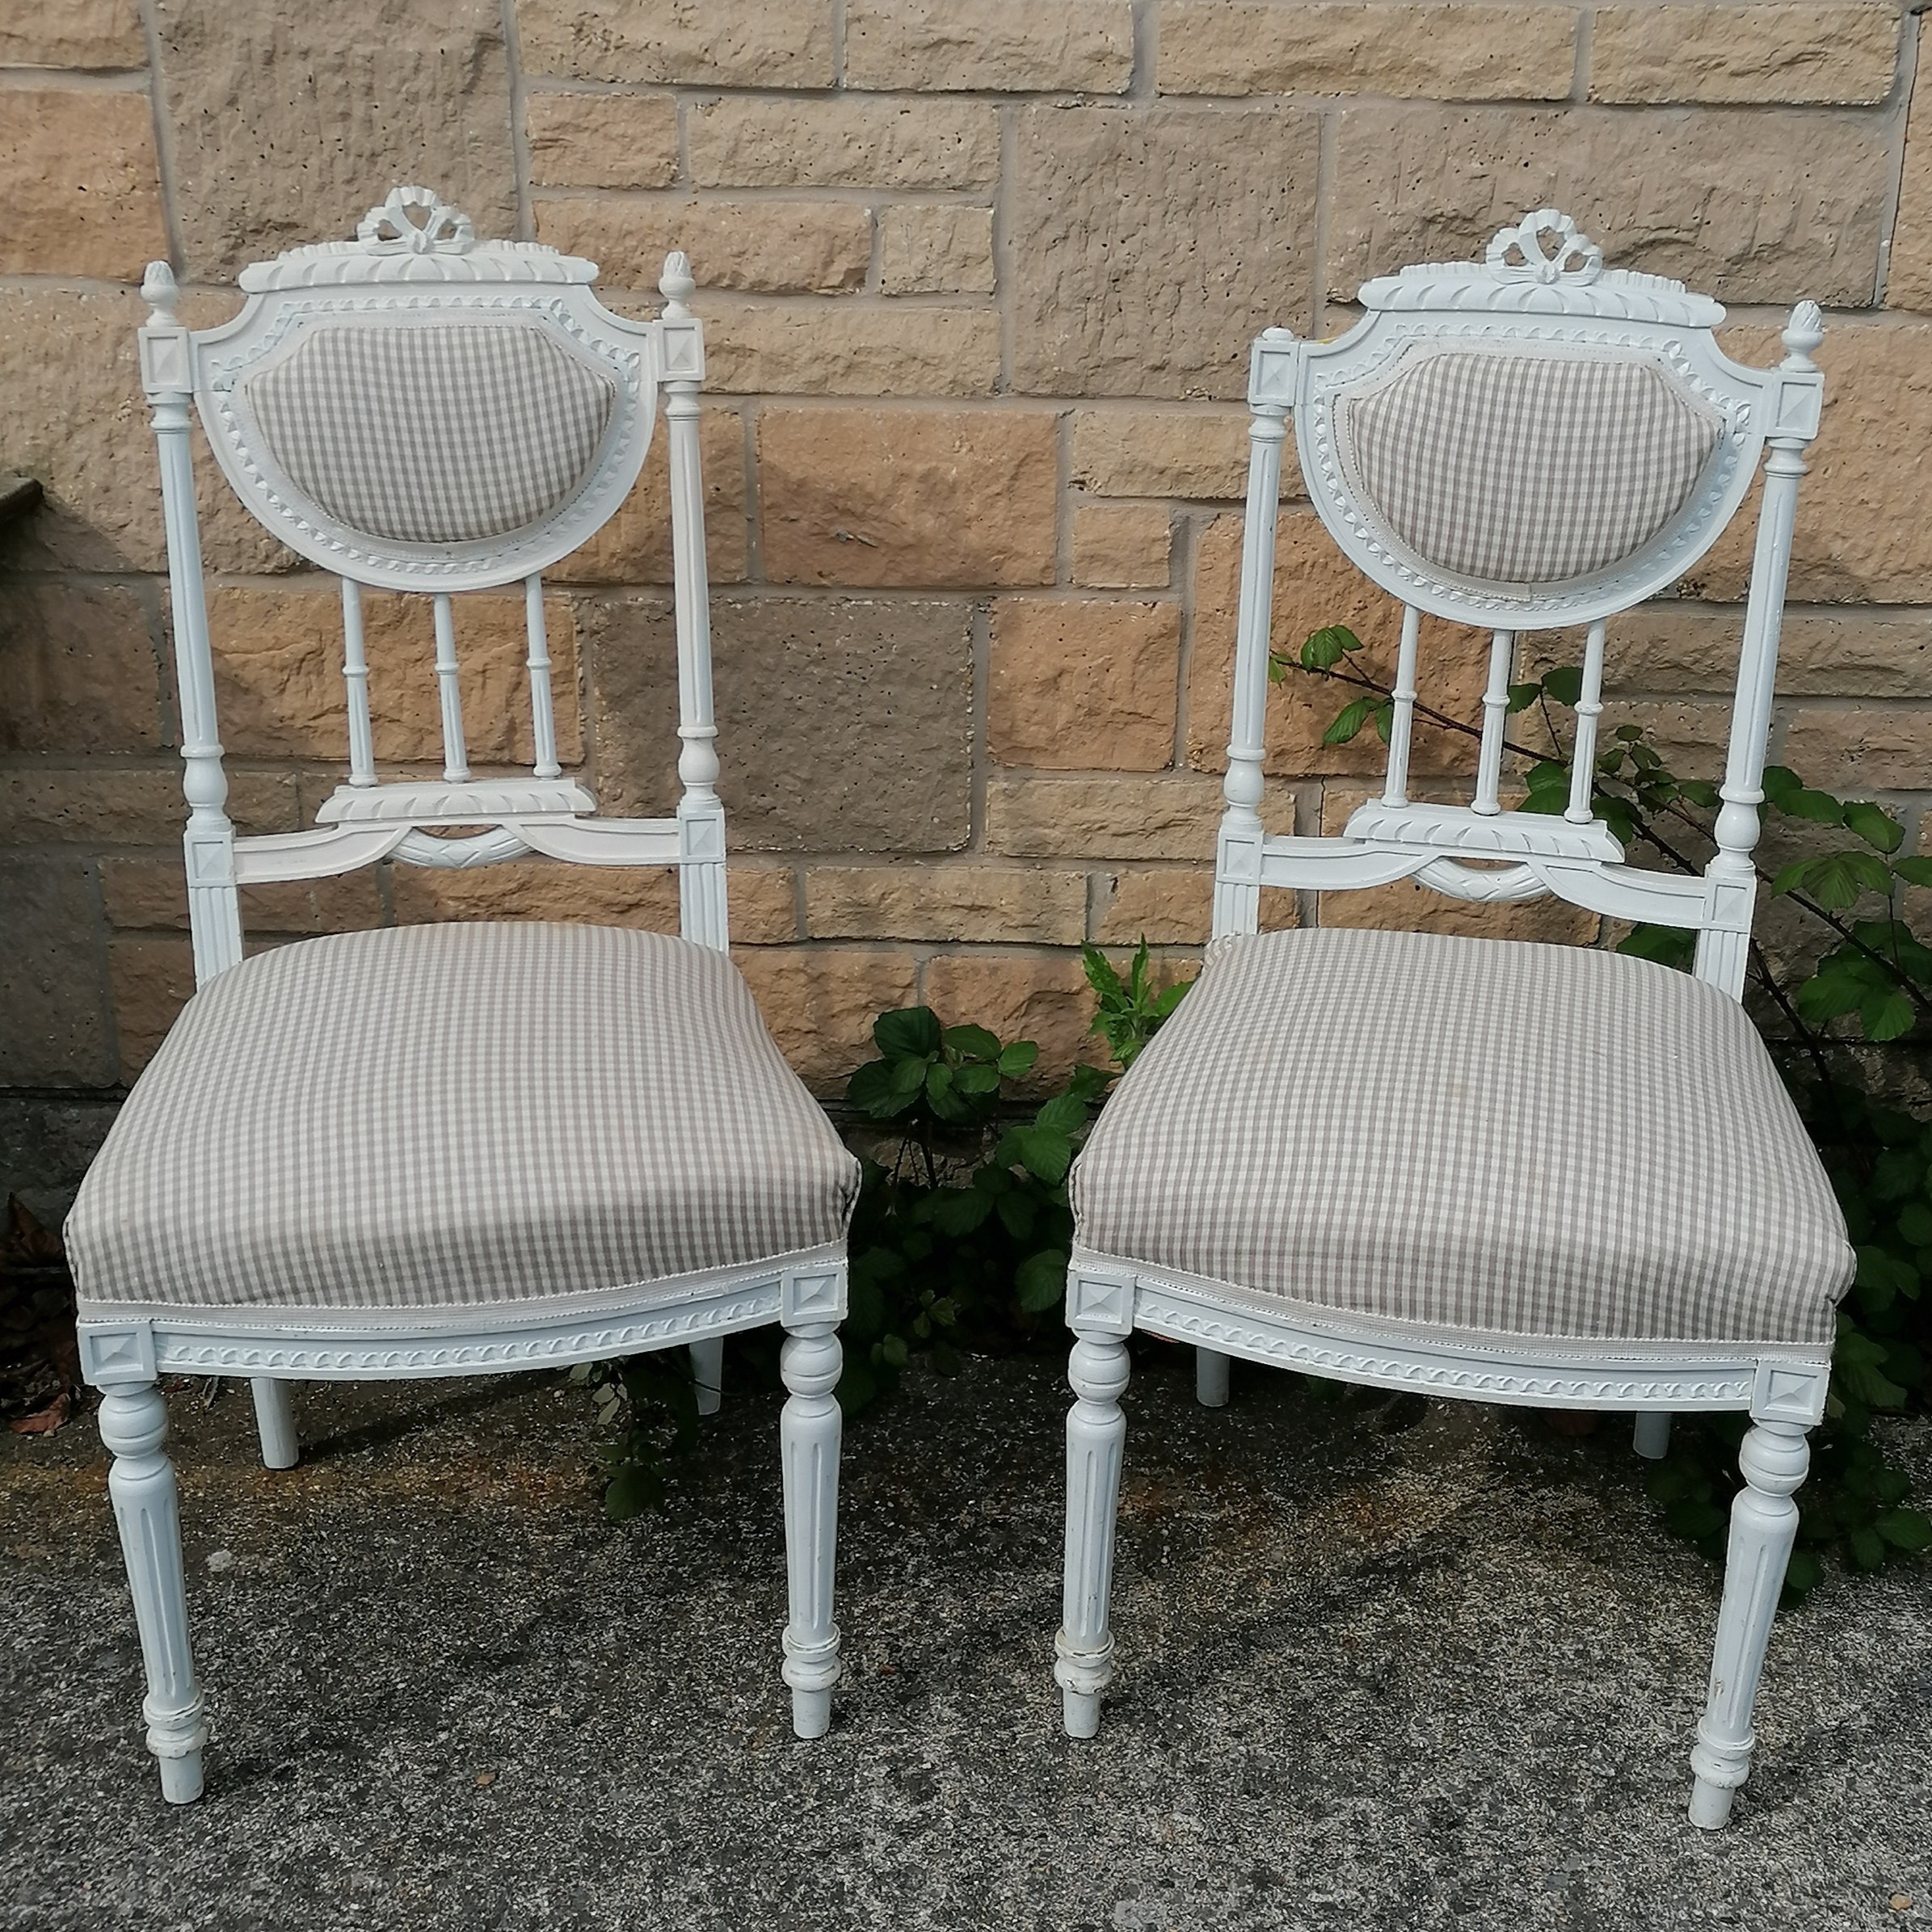 Pair of white painted bedroom chairs with check fabric upholstery